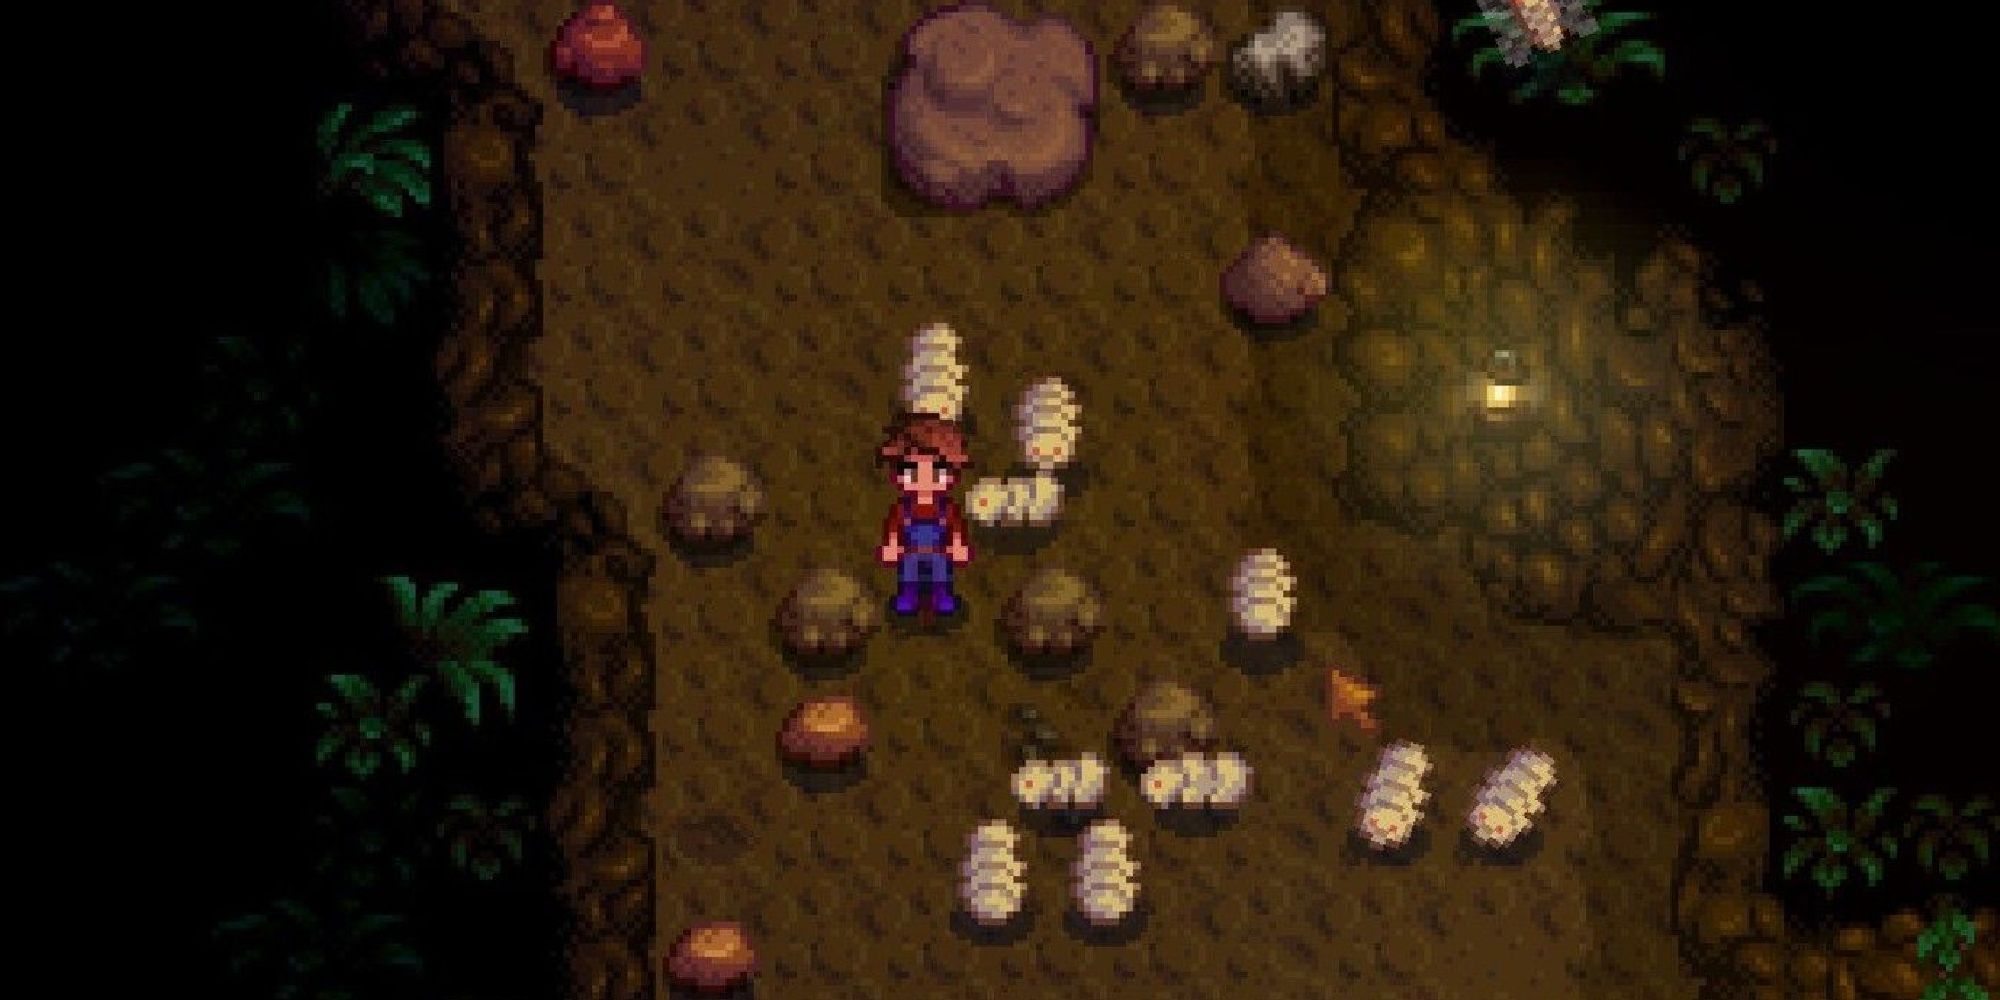 stardew valley player standing next to grubs in a cave